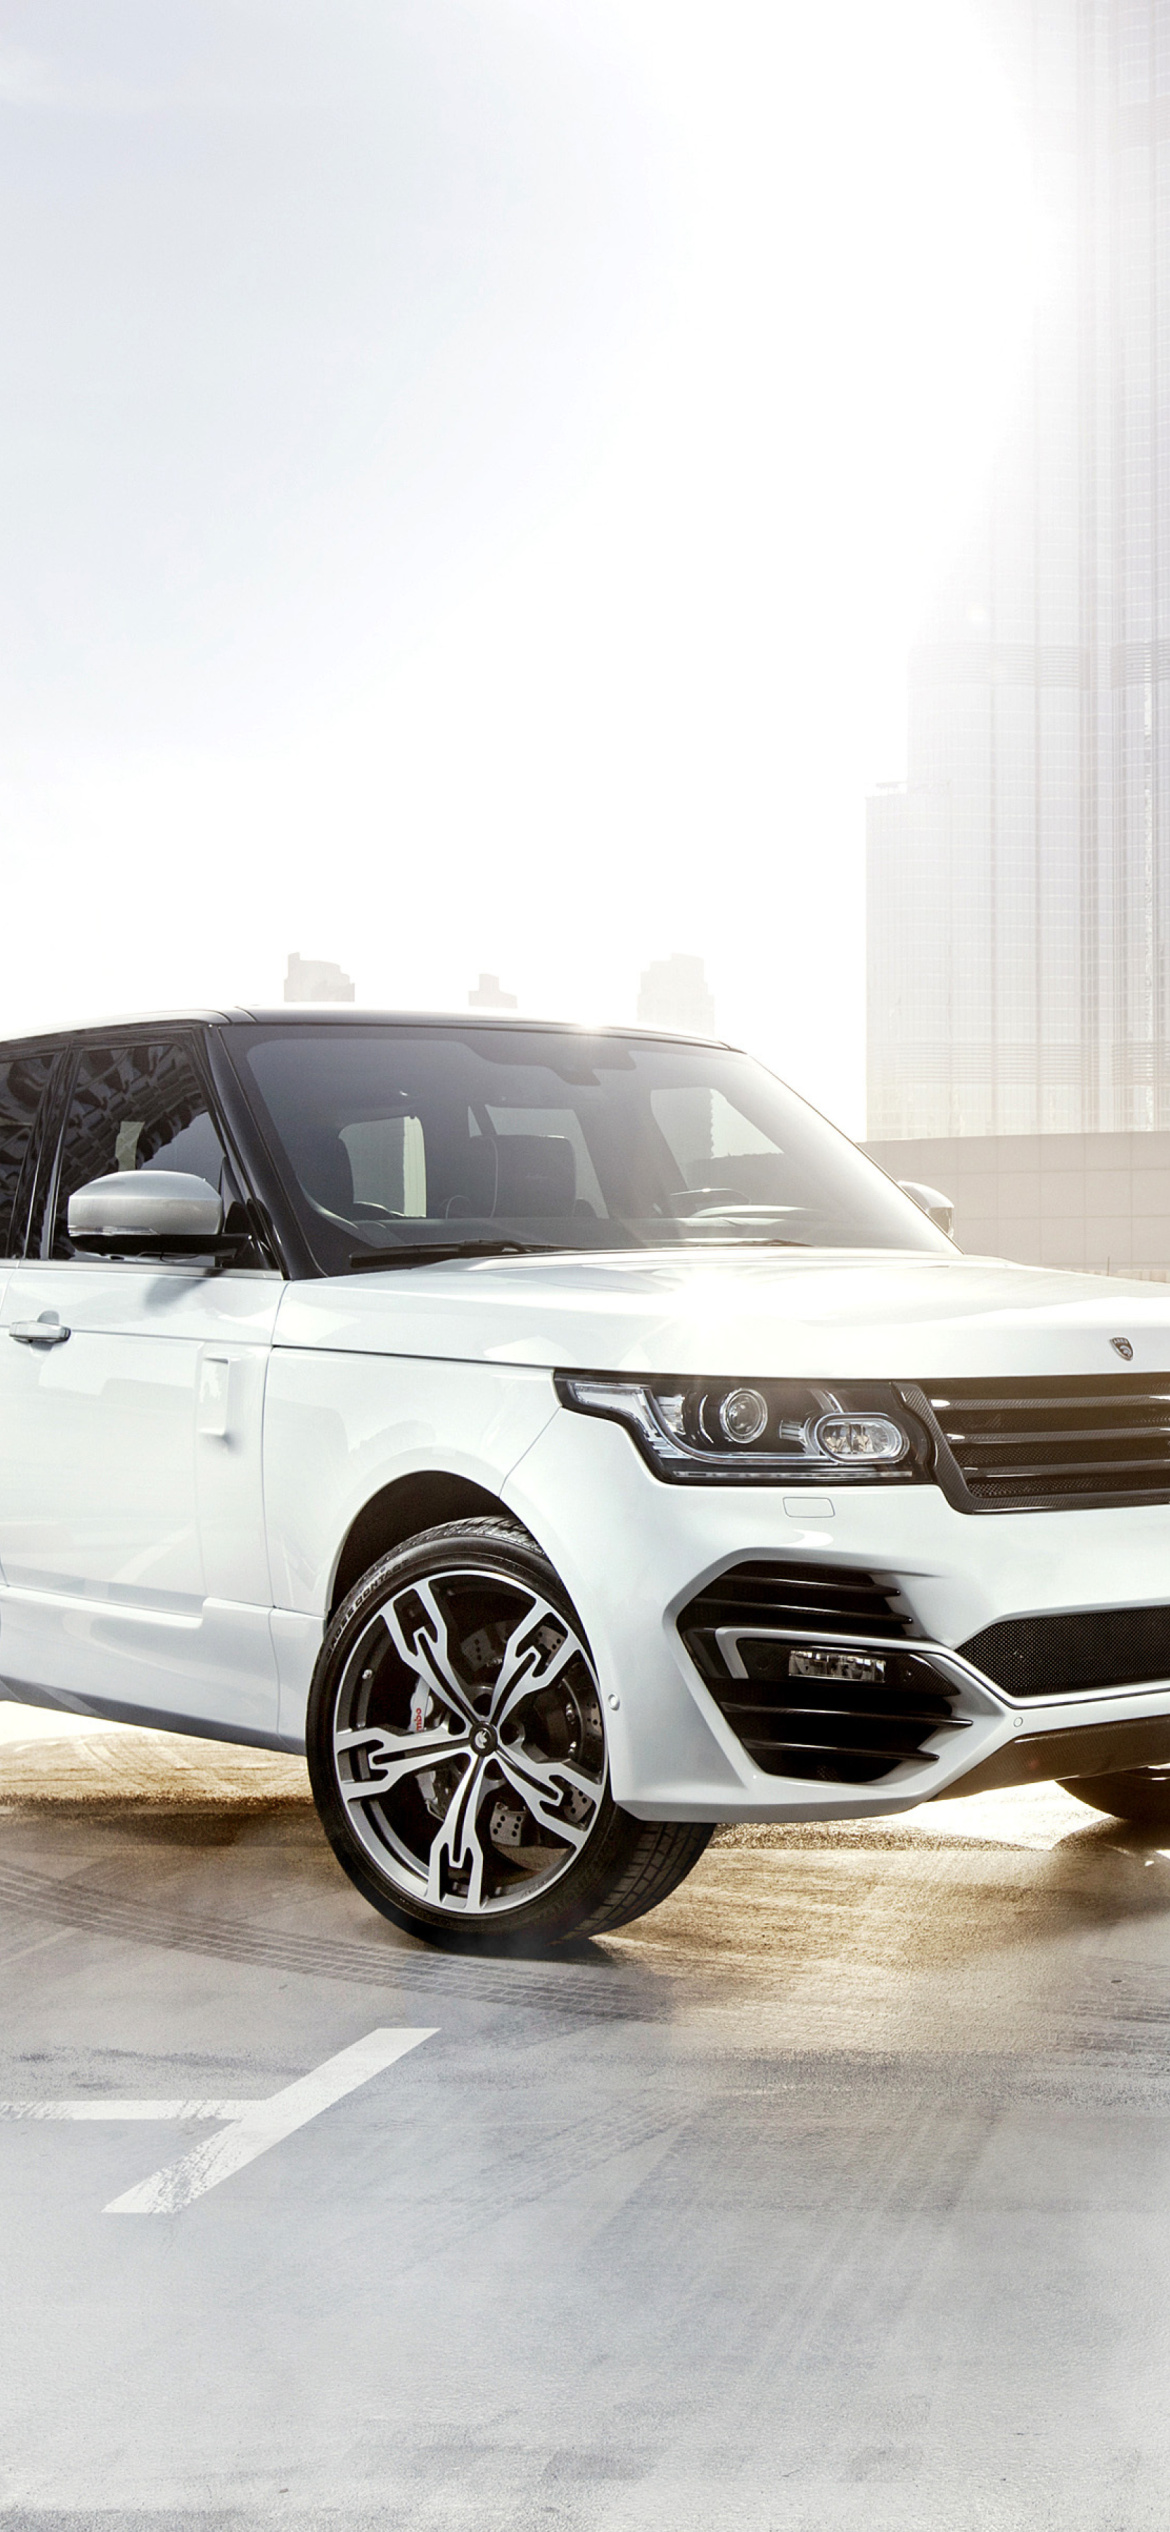 ARES Design Range Rover 600 Supercharged wallpaper 1170x2532